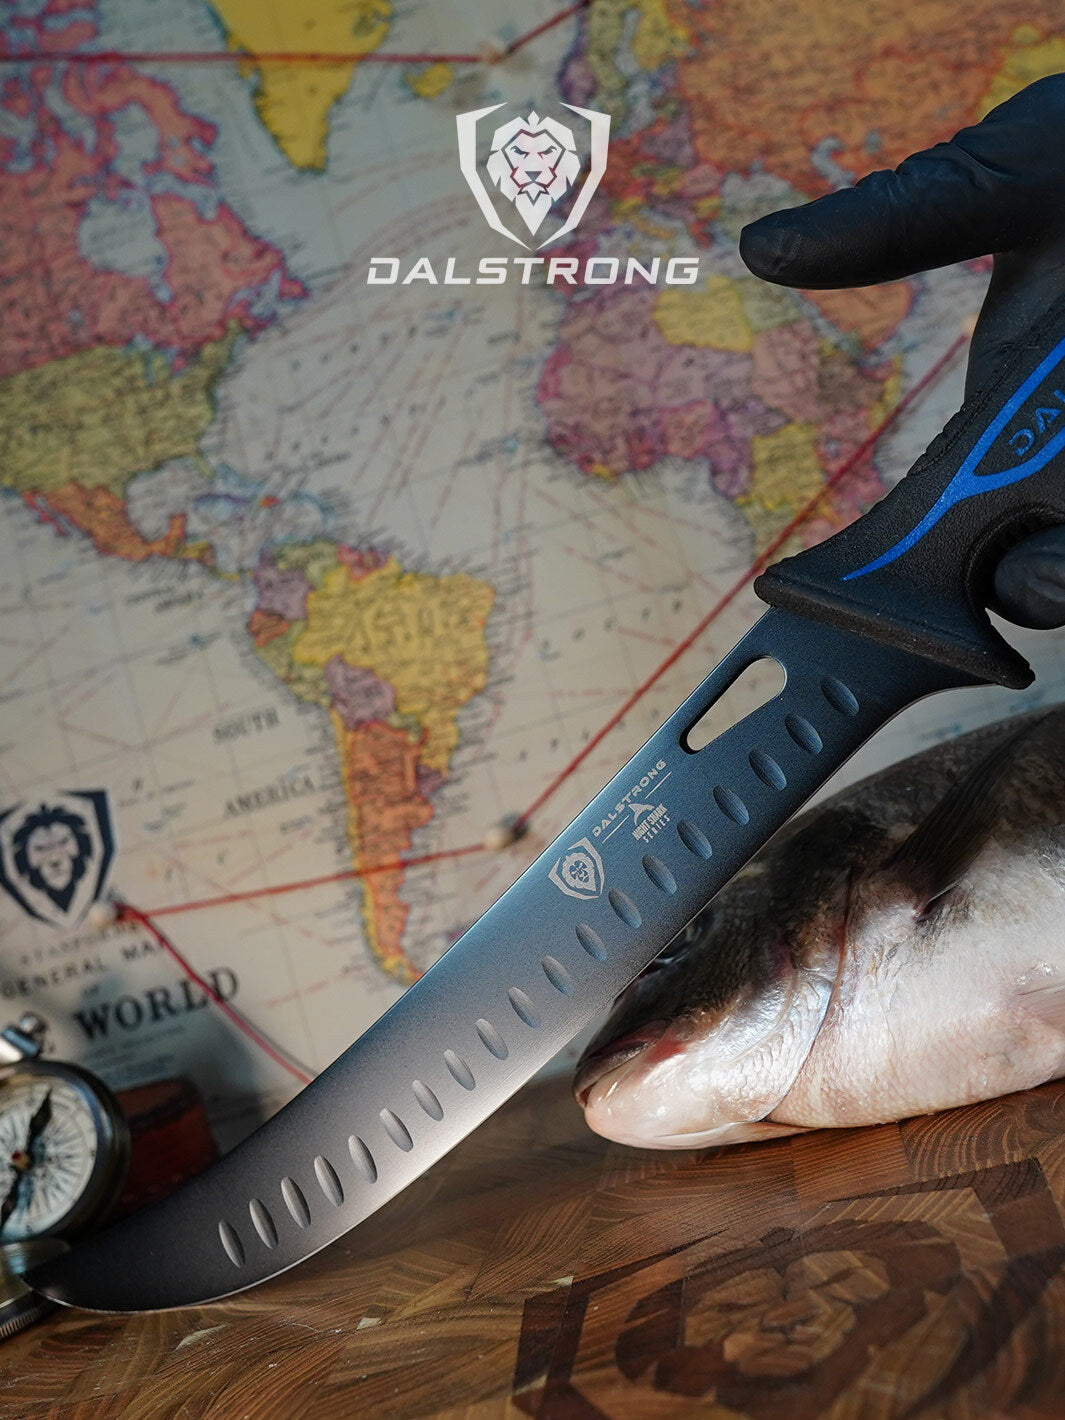 Dalstrong night shark series 10 inch butcher knife with shark skin handle above a cutting board with fish.